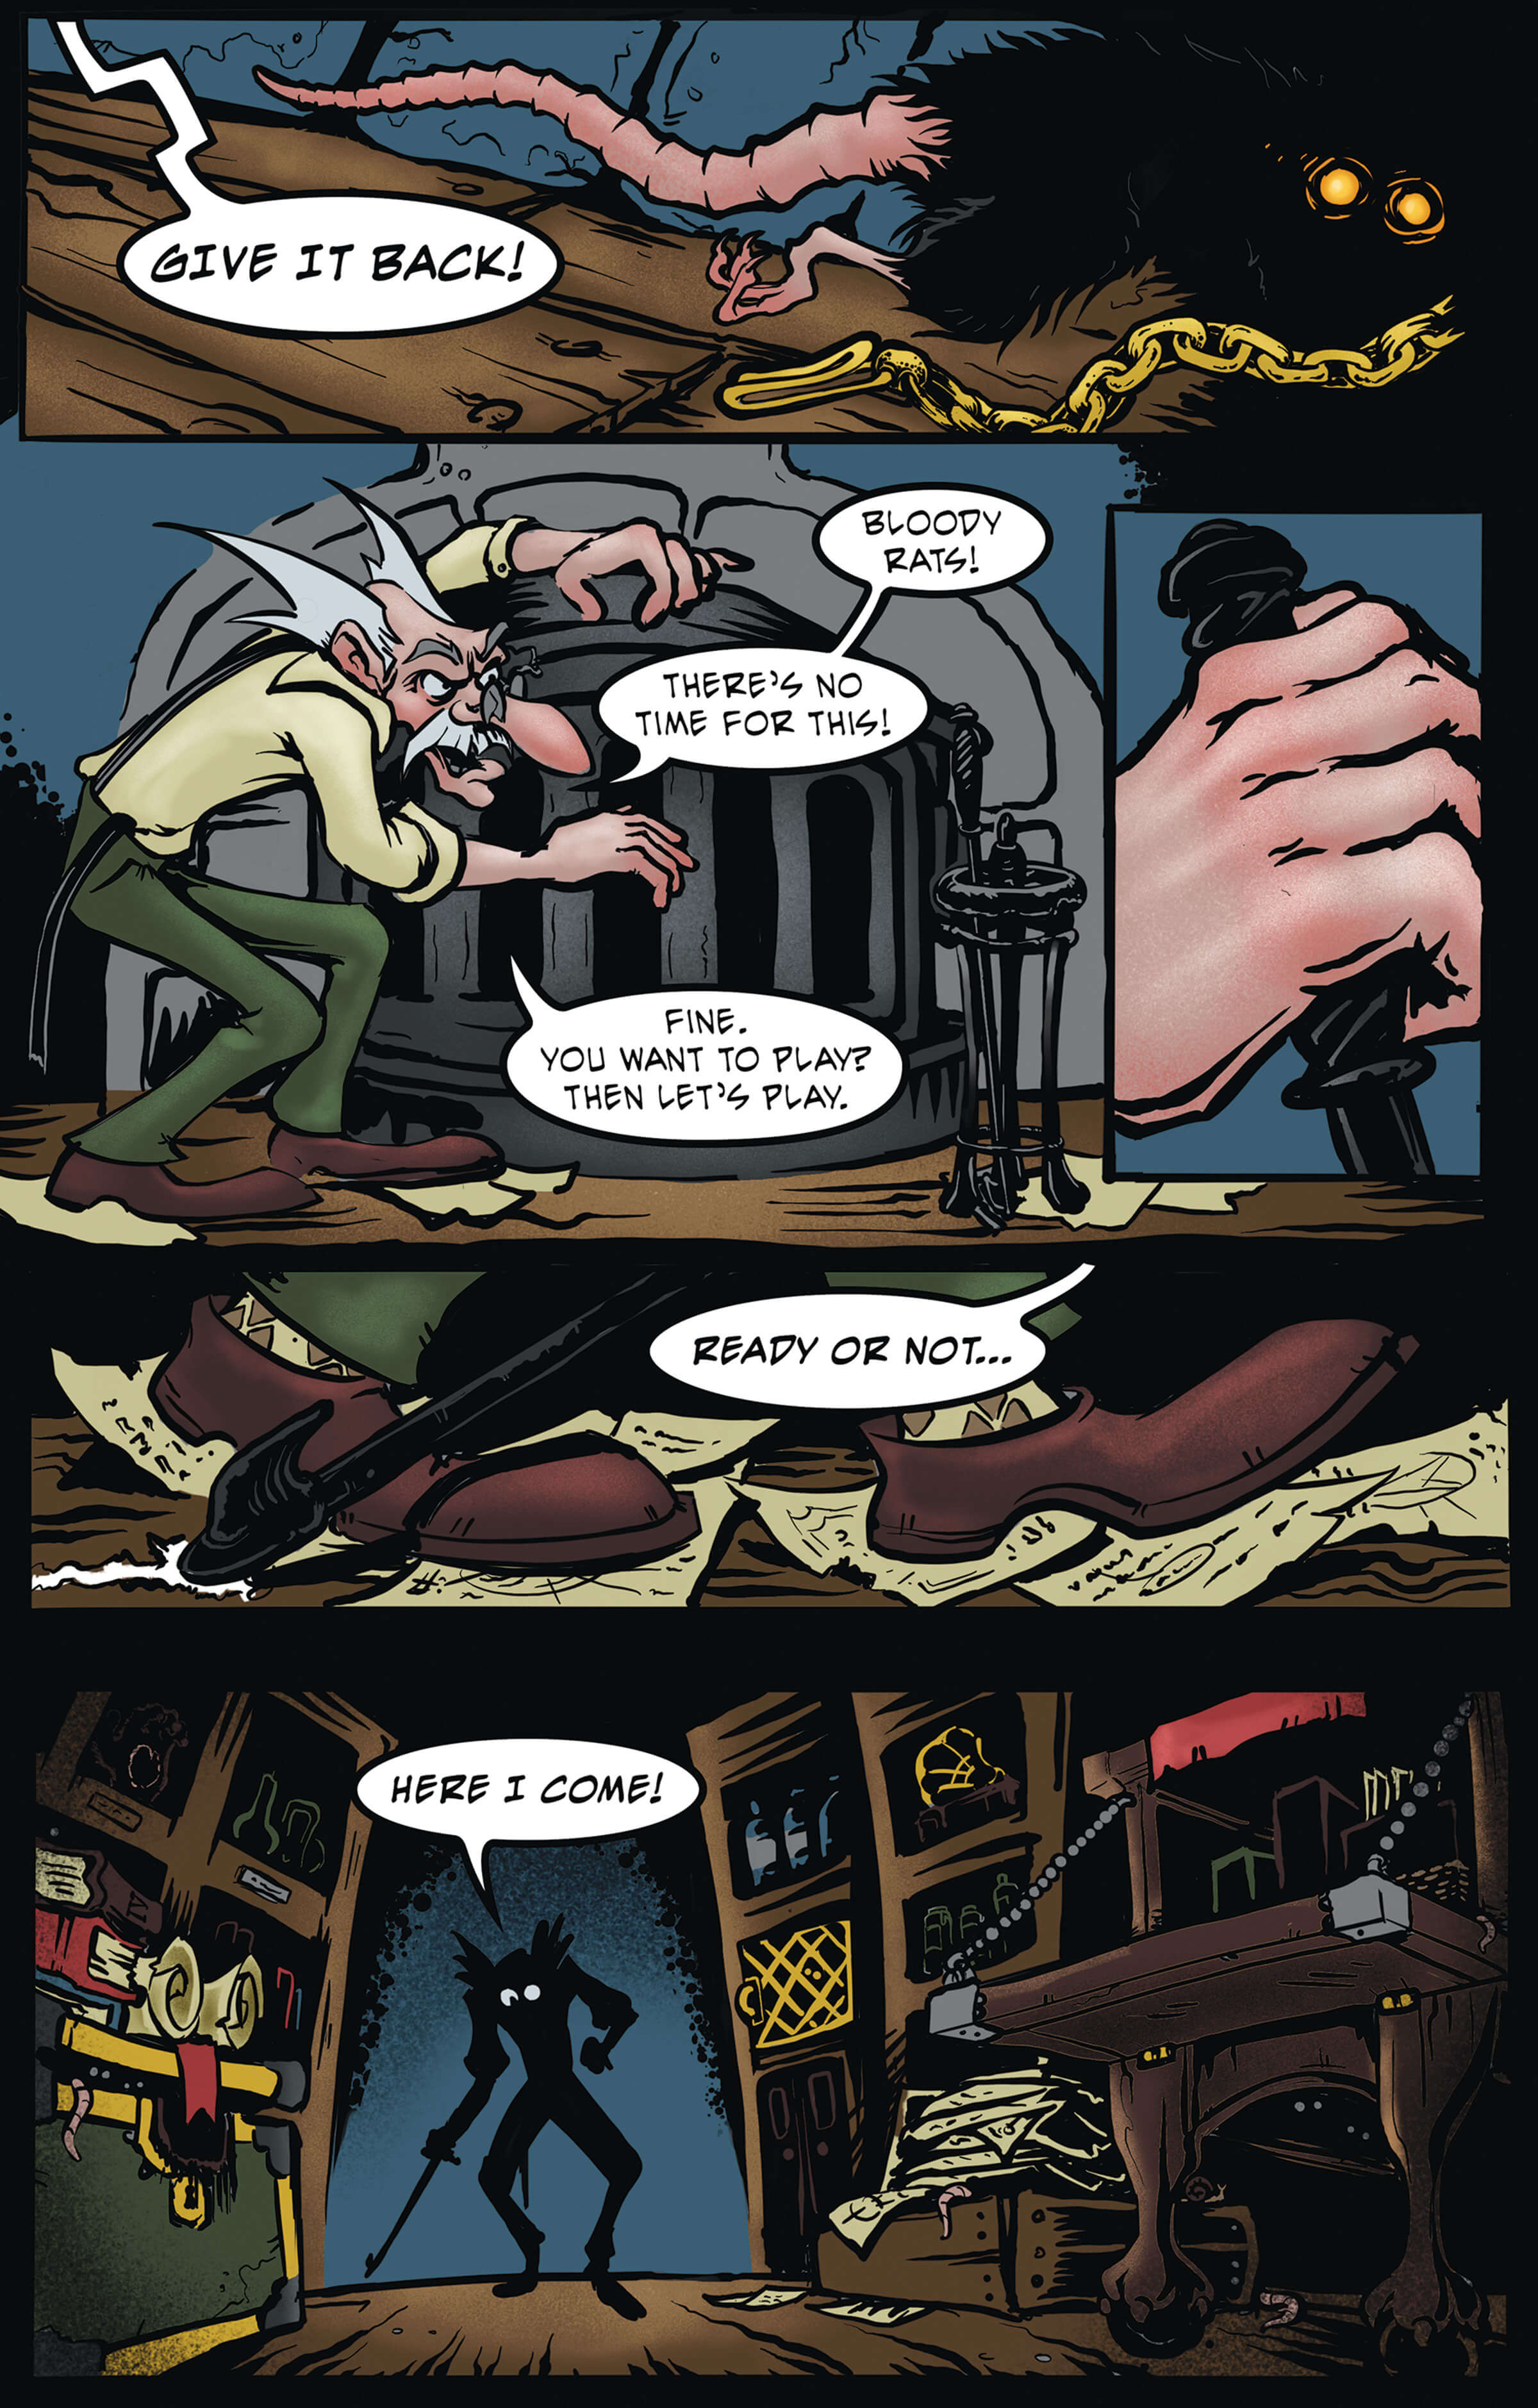 Comic book panels of an old man chasing a rat